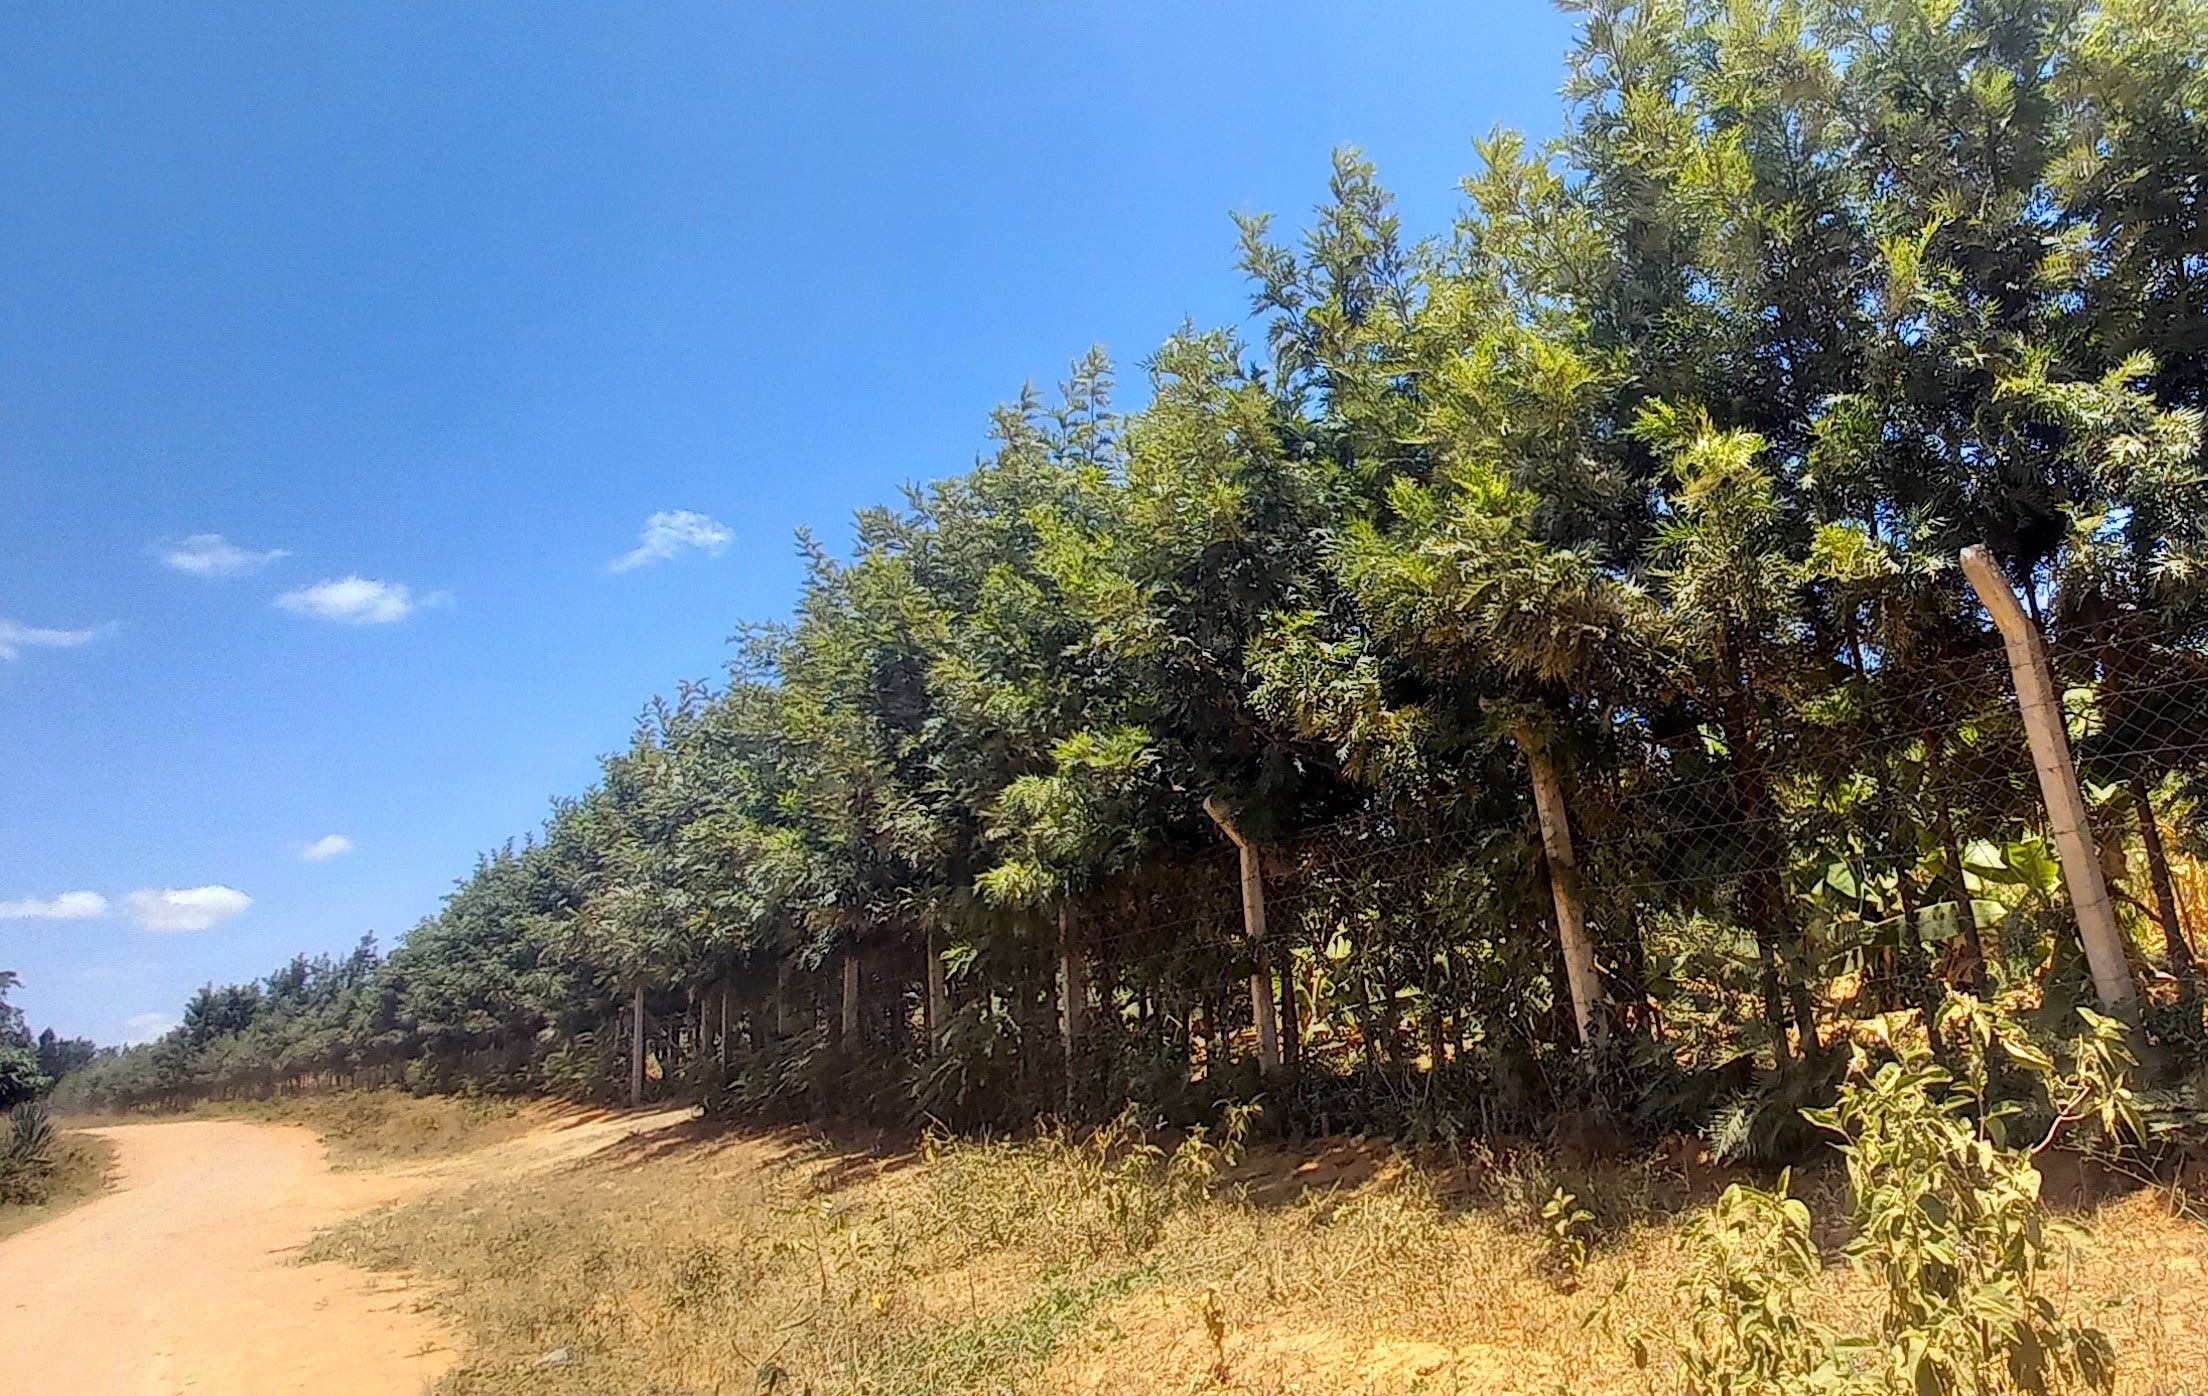 A long line of trees stands next to a dirt road.